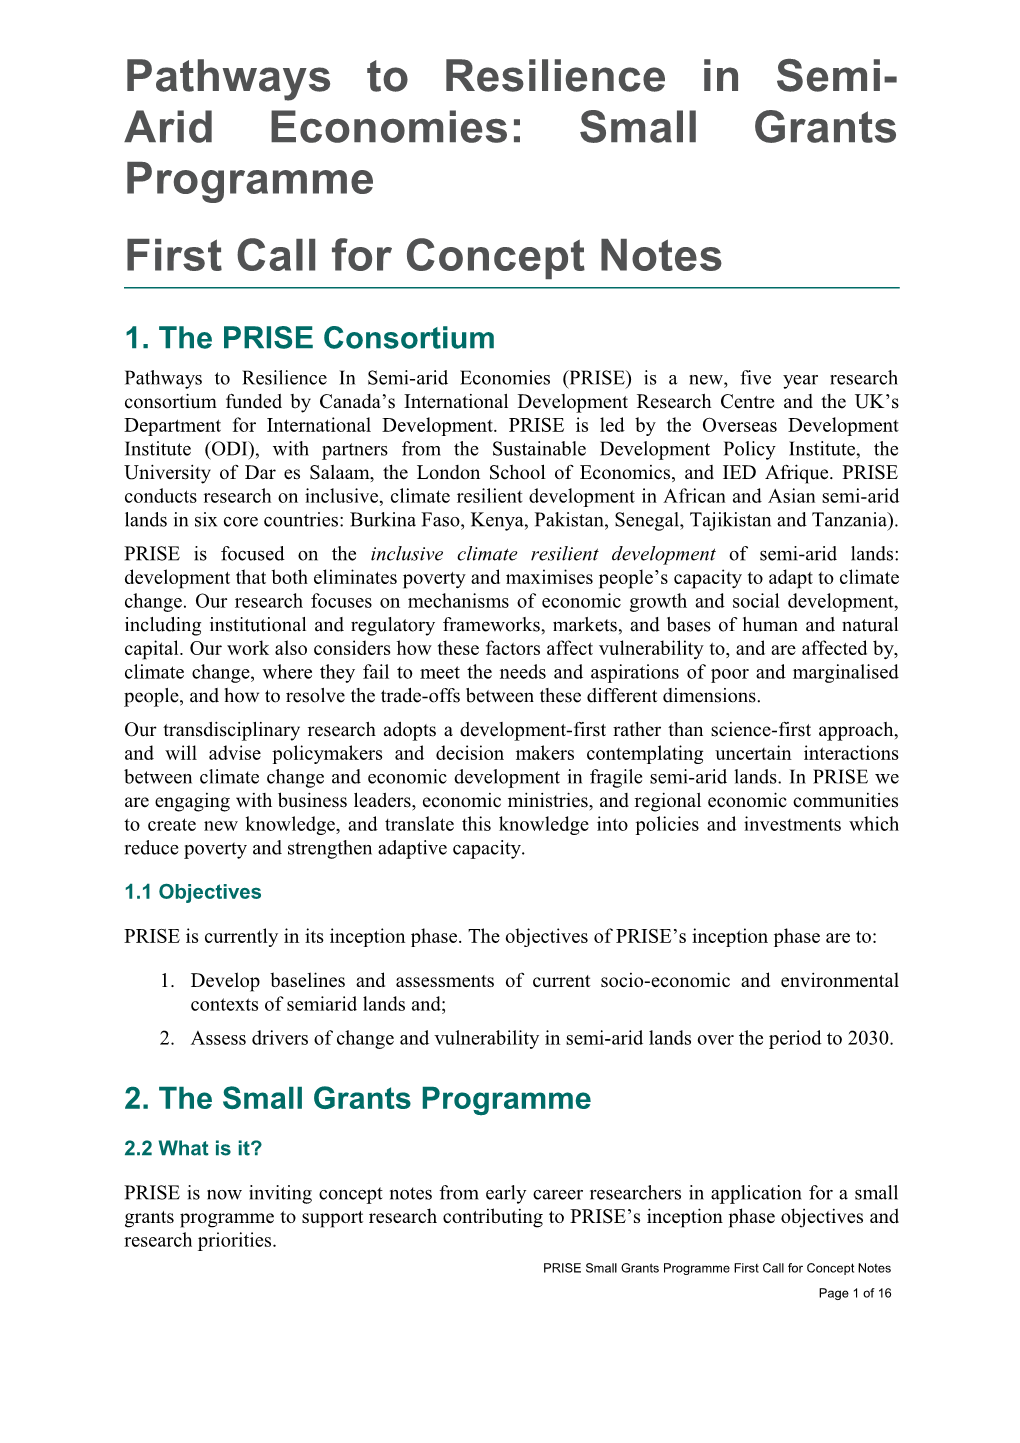 Pathways to Resilience in Semi-Arid Economies: Small Grants Programme